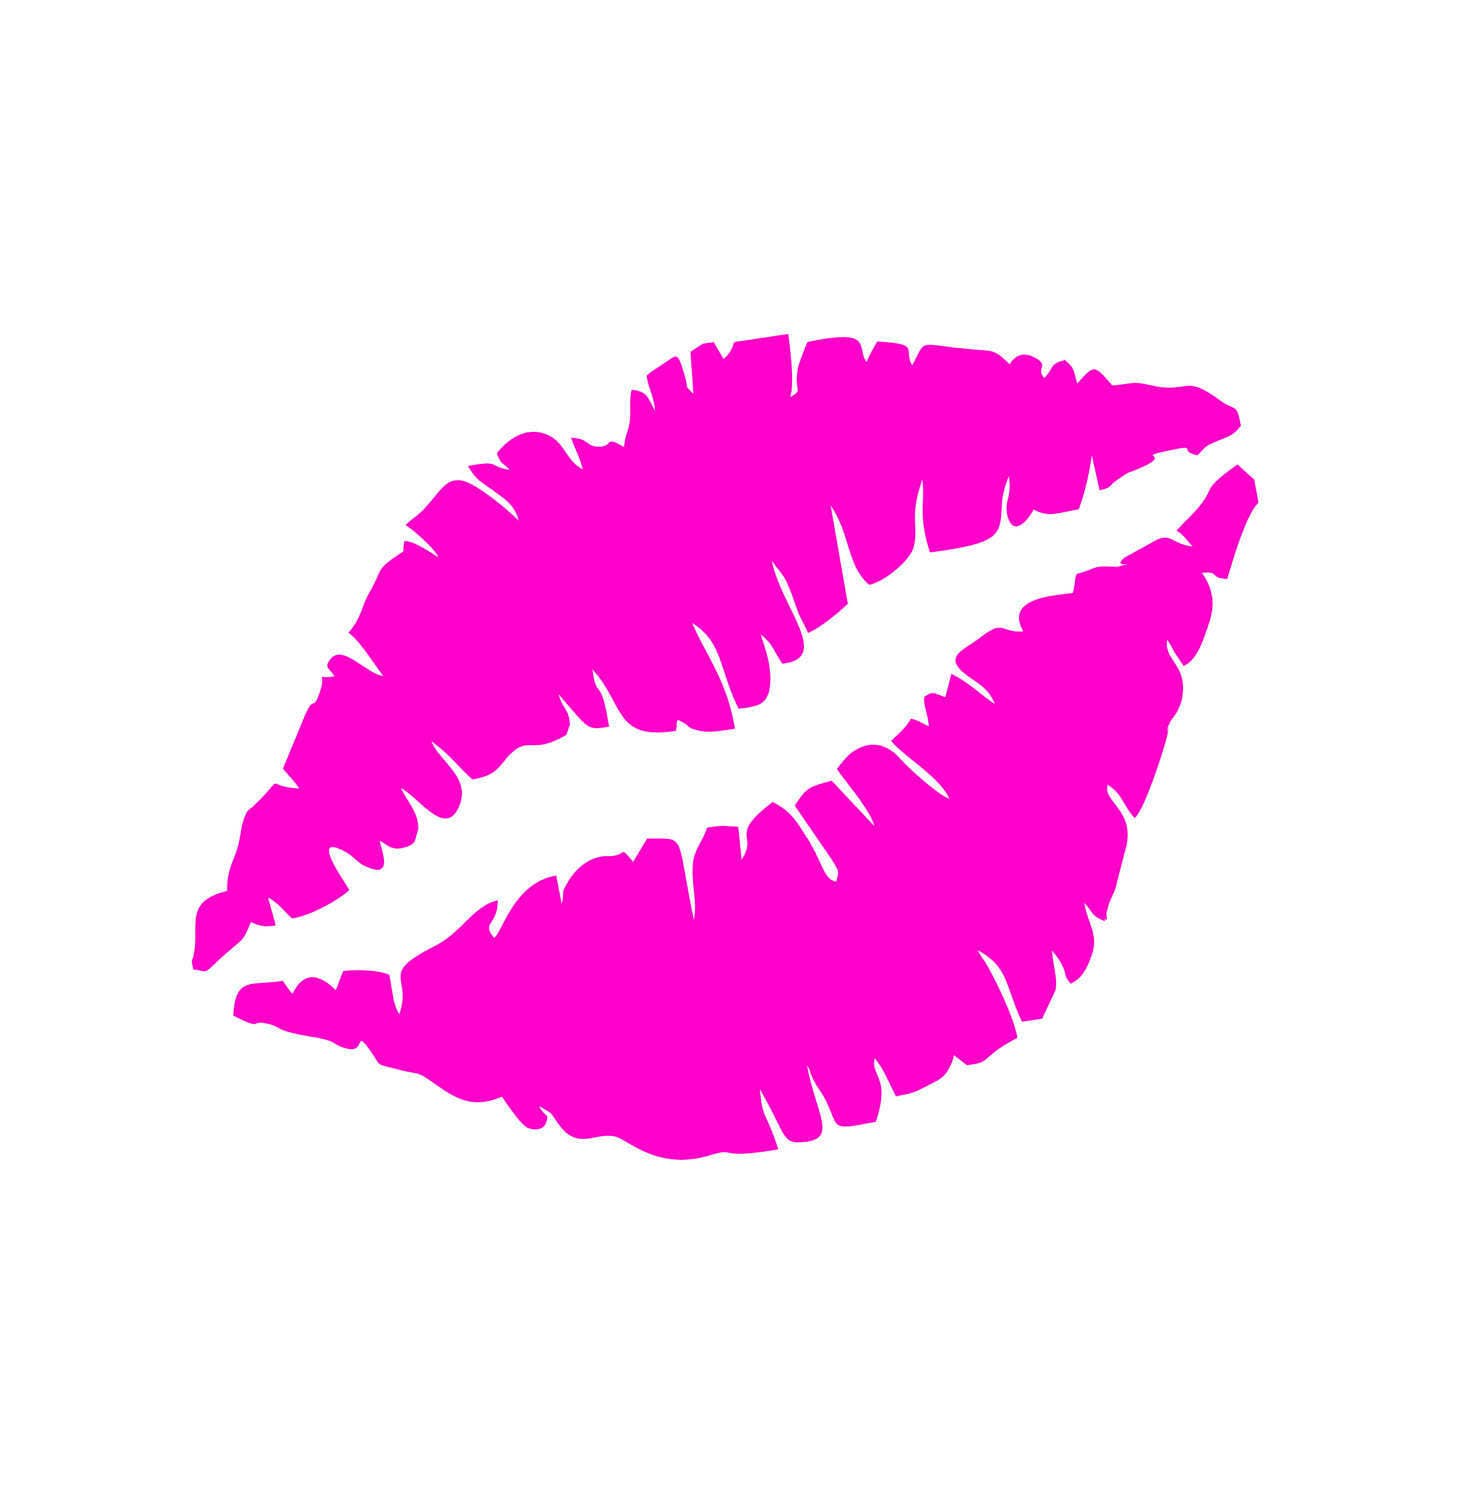 Kiss Mark Lips 5.75 Wide Kiss , Lips Mouth, Kiss Mark, Decals, Stickers ...